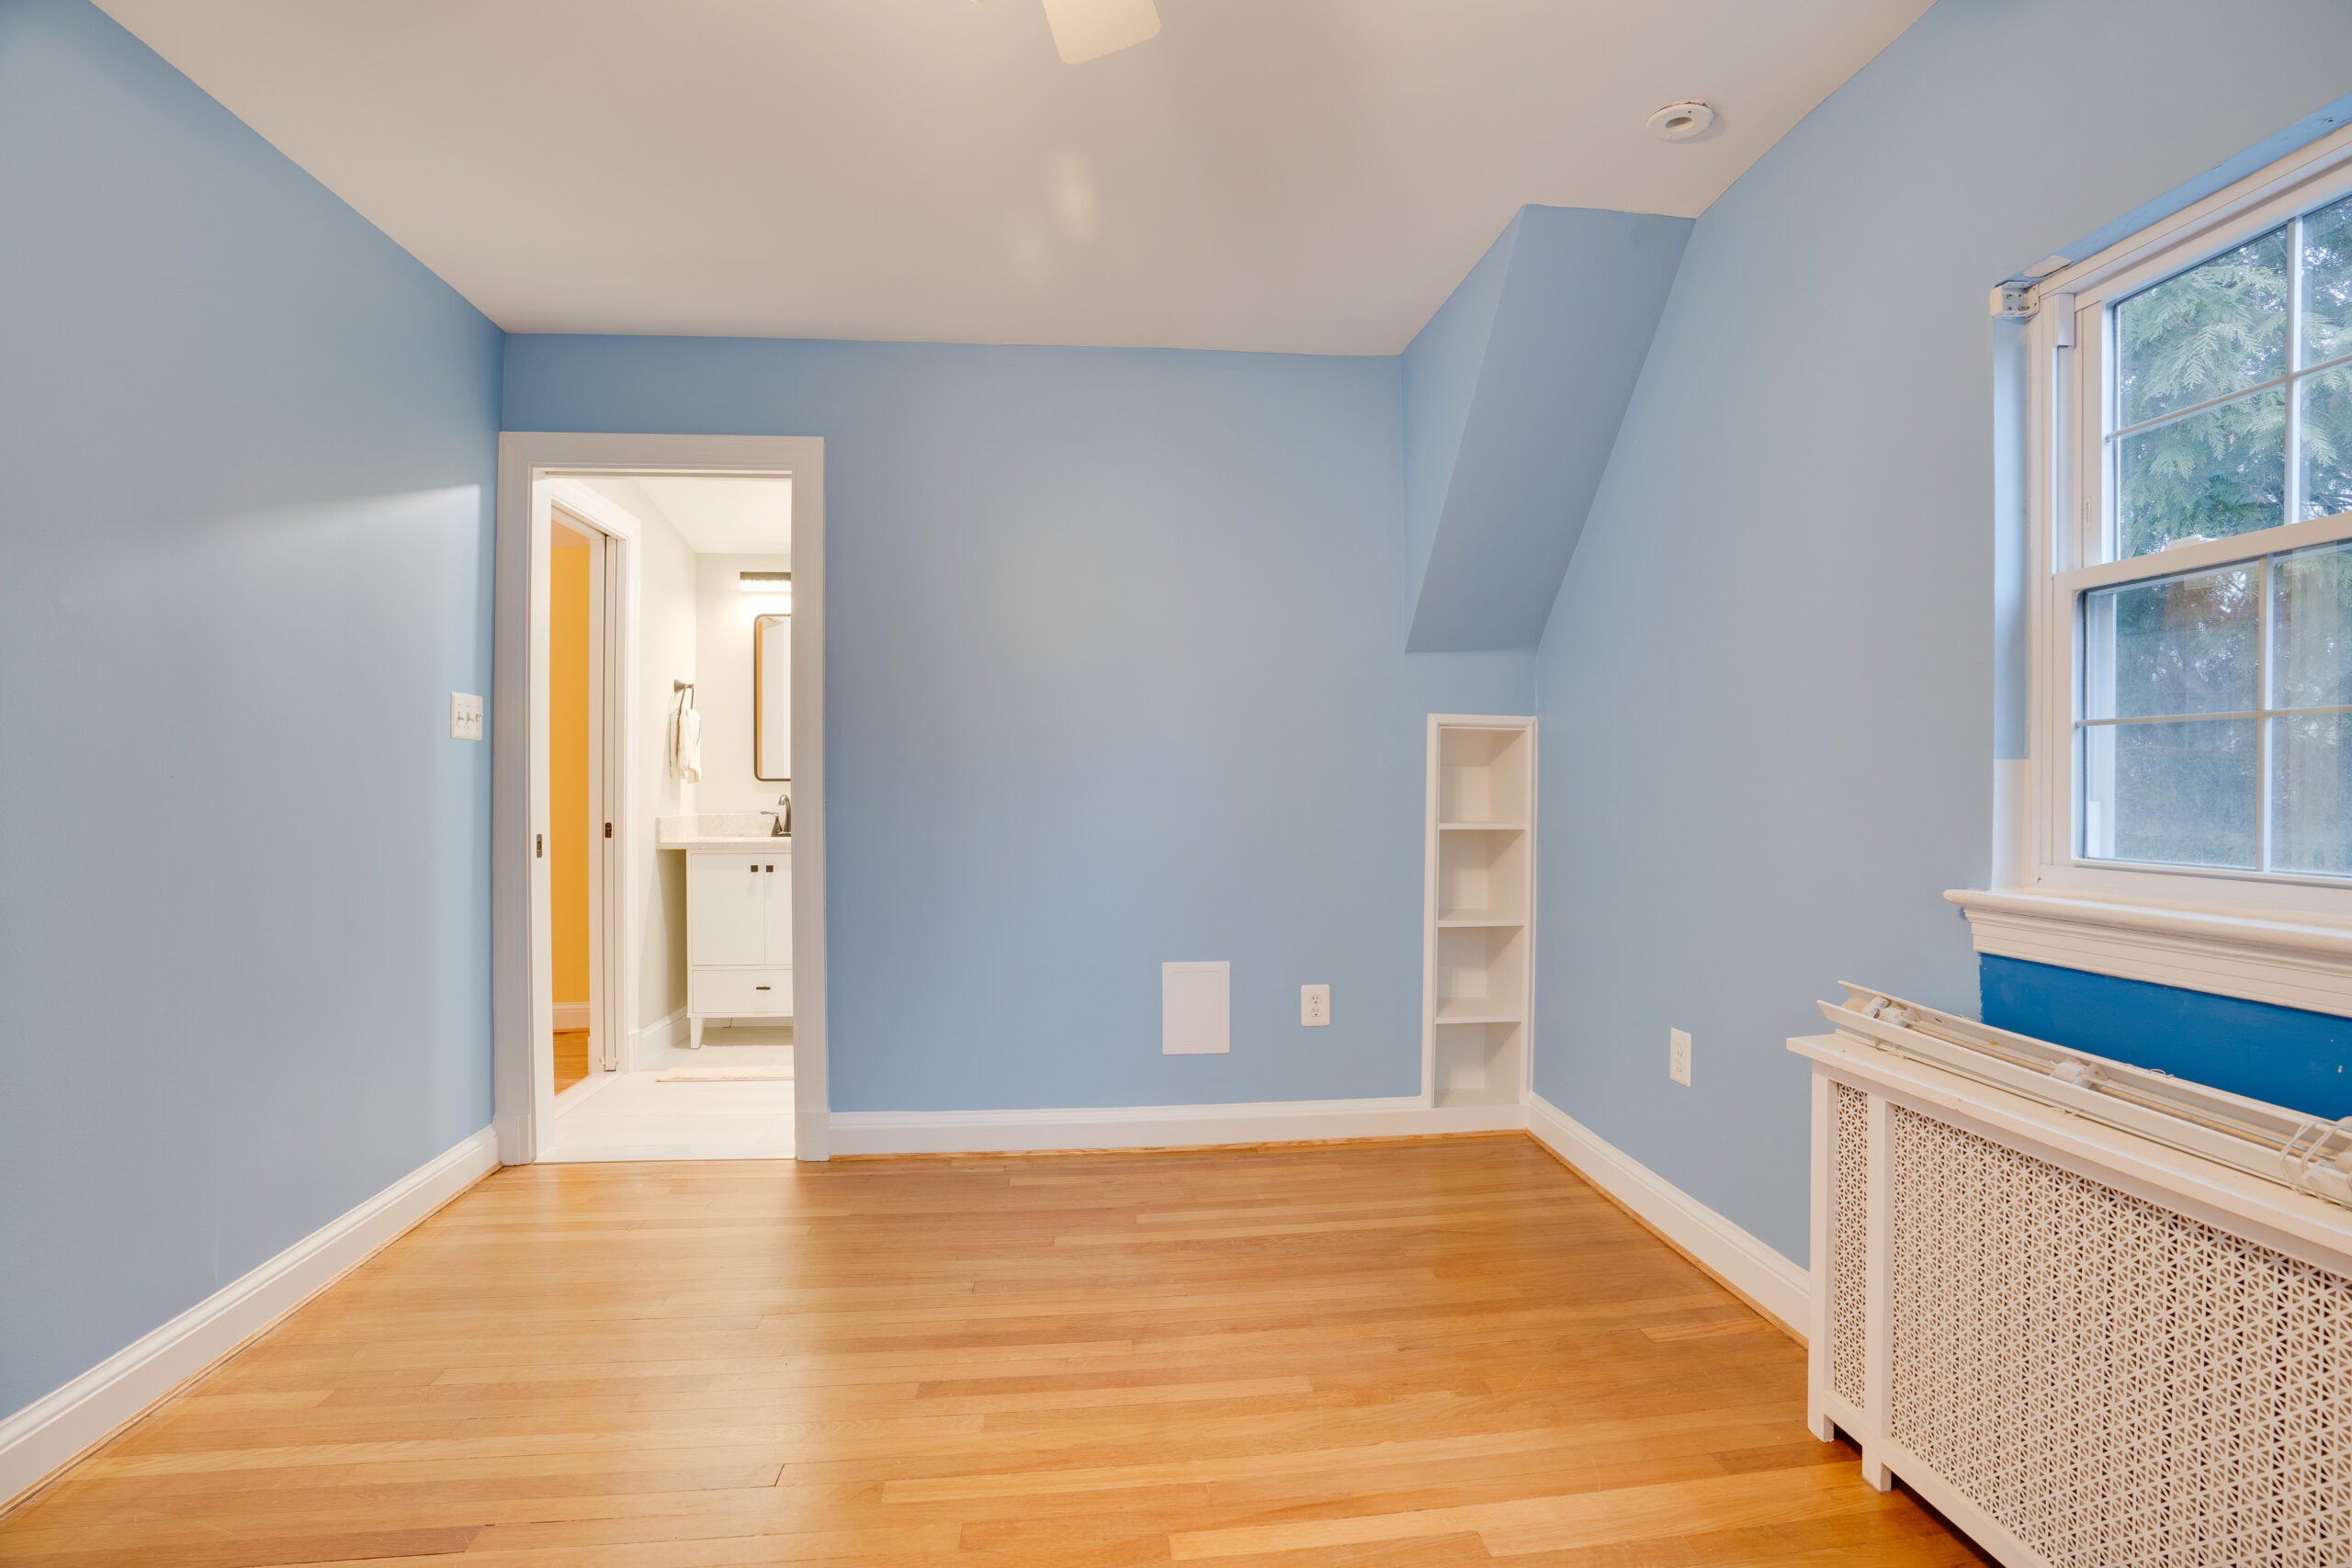 Room with blue paint, wood flooring